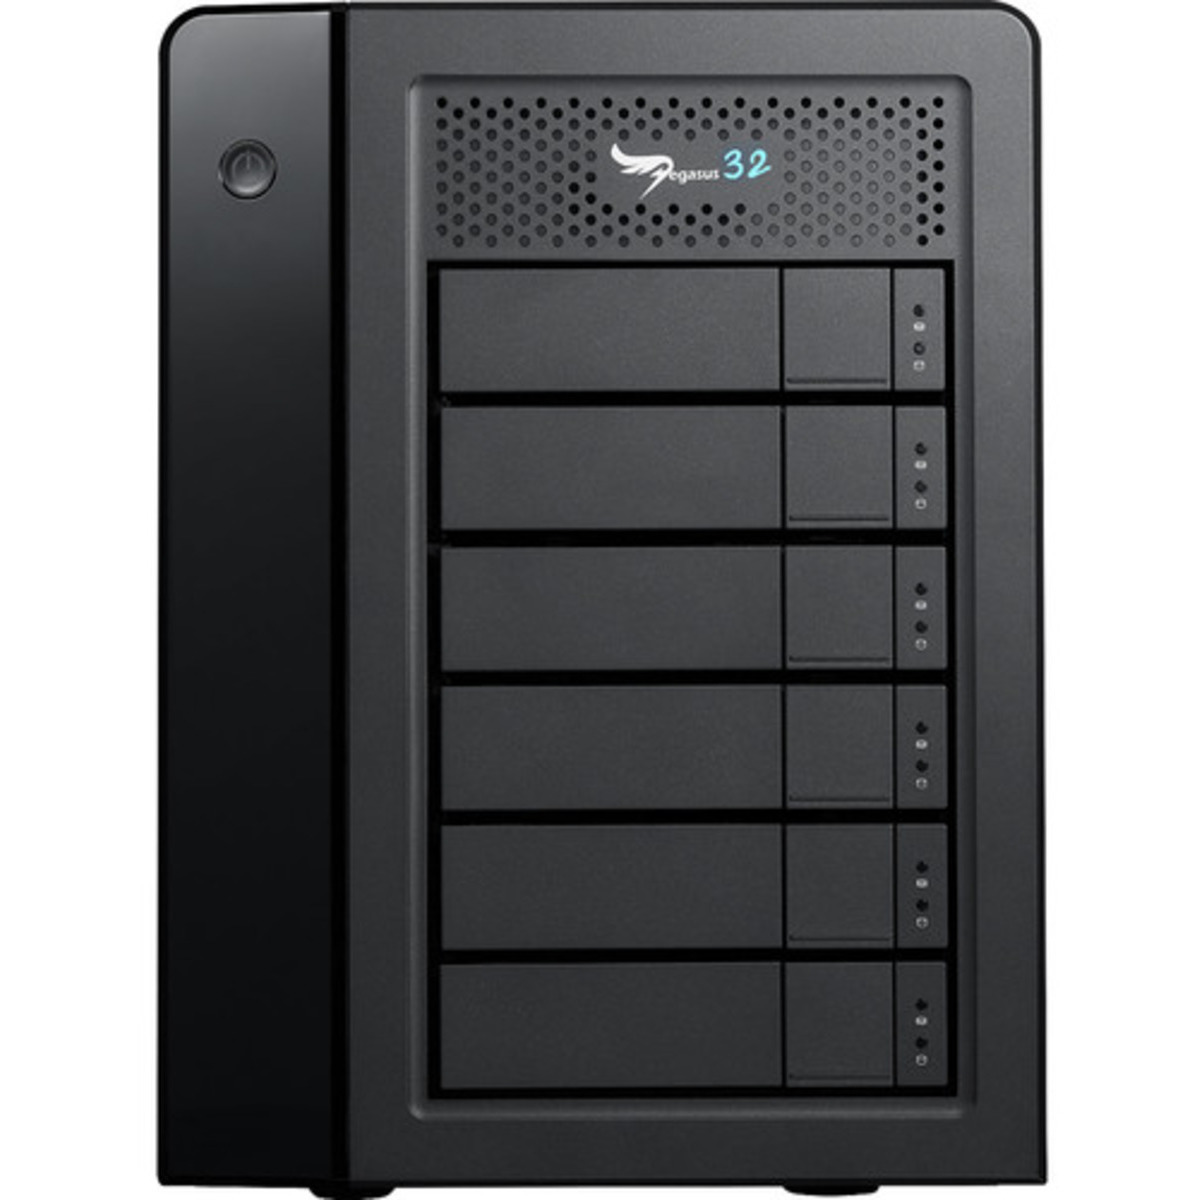 Promise Technology Pegasus32 R6 Thunderbolt 3 80tb 6-Bay Desktop Multimedia / Power User / Business DAS - Direct Attached Storage Device 5x16tb Seagate EXOS X18 ST16000NM000J 3.5 7200rpm SATA 6Gb/s HDD ENTERPRISE Class Drives Installed - Burn-In Tested Pegasus32 R6 Thunderbolt 3